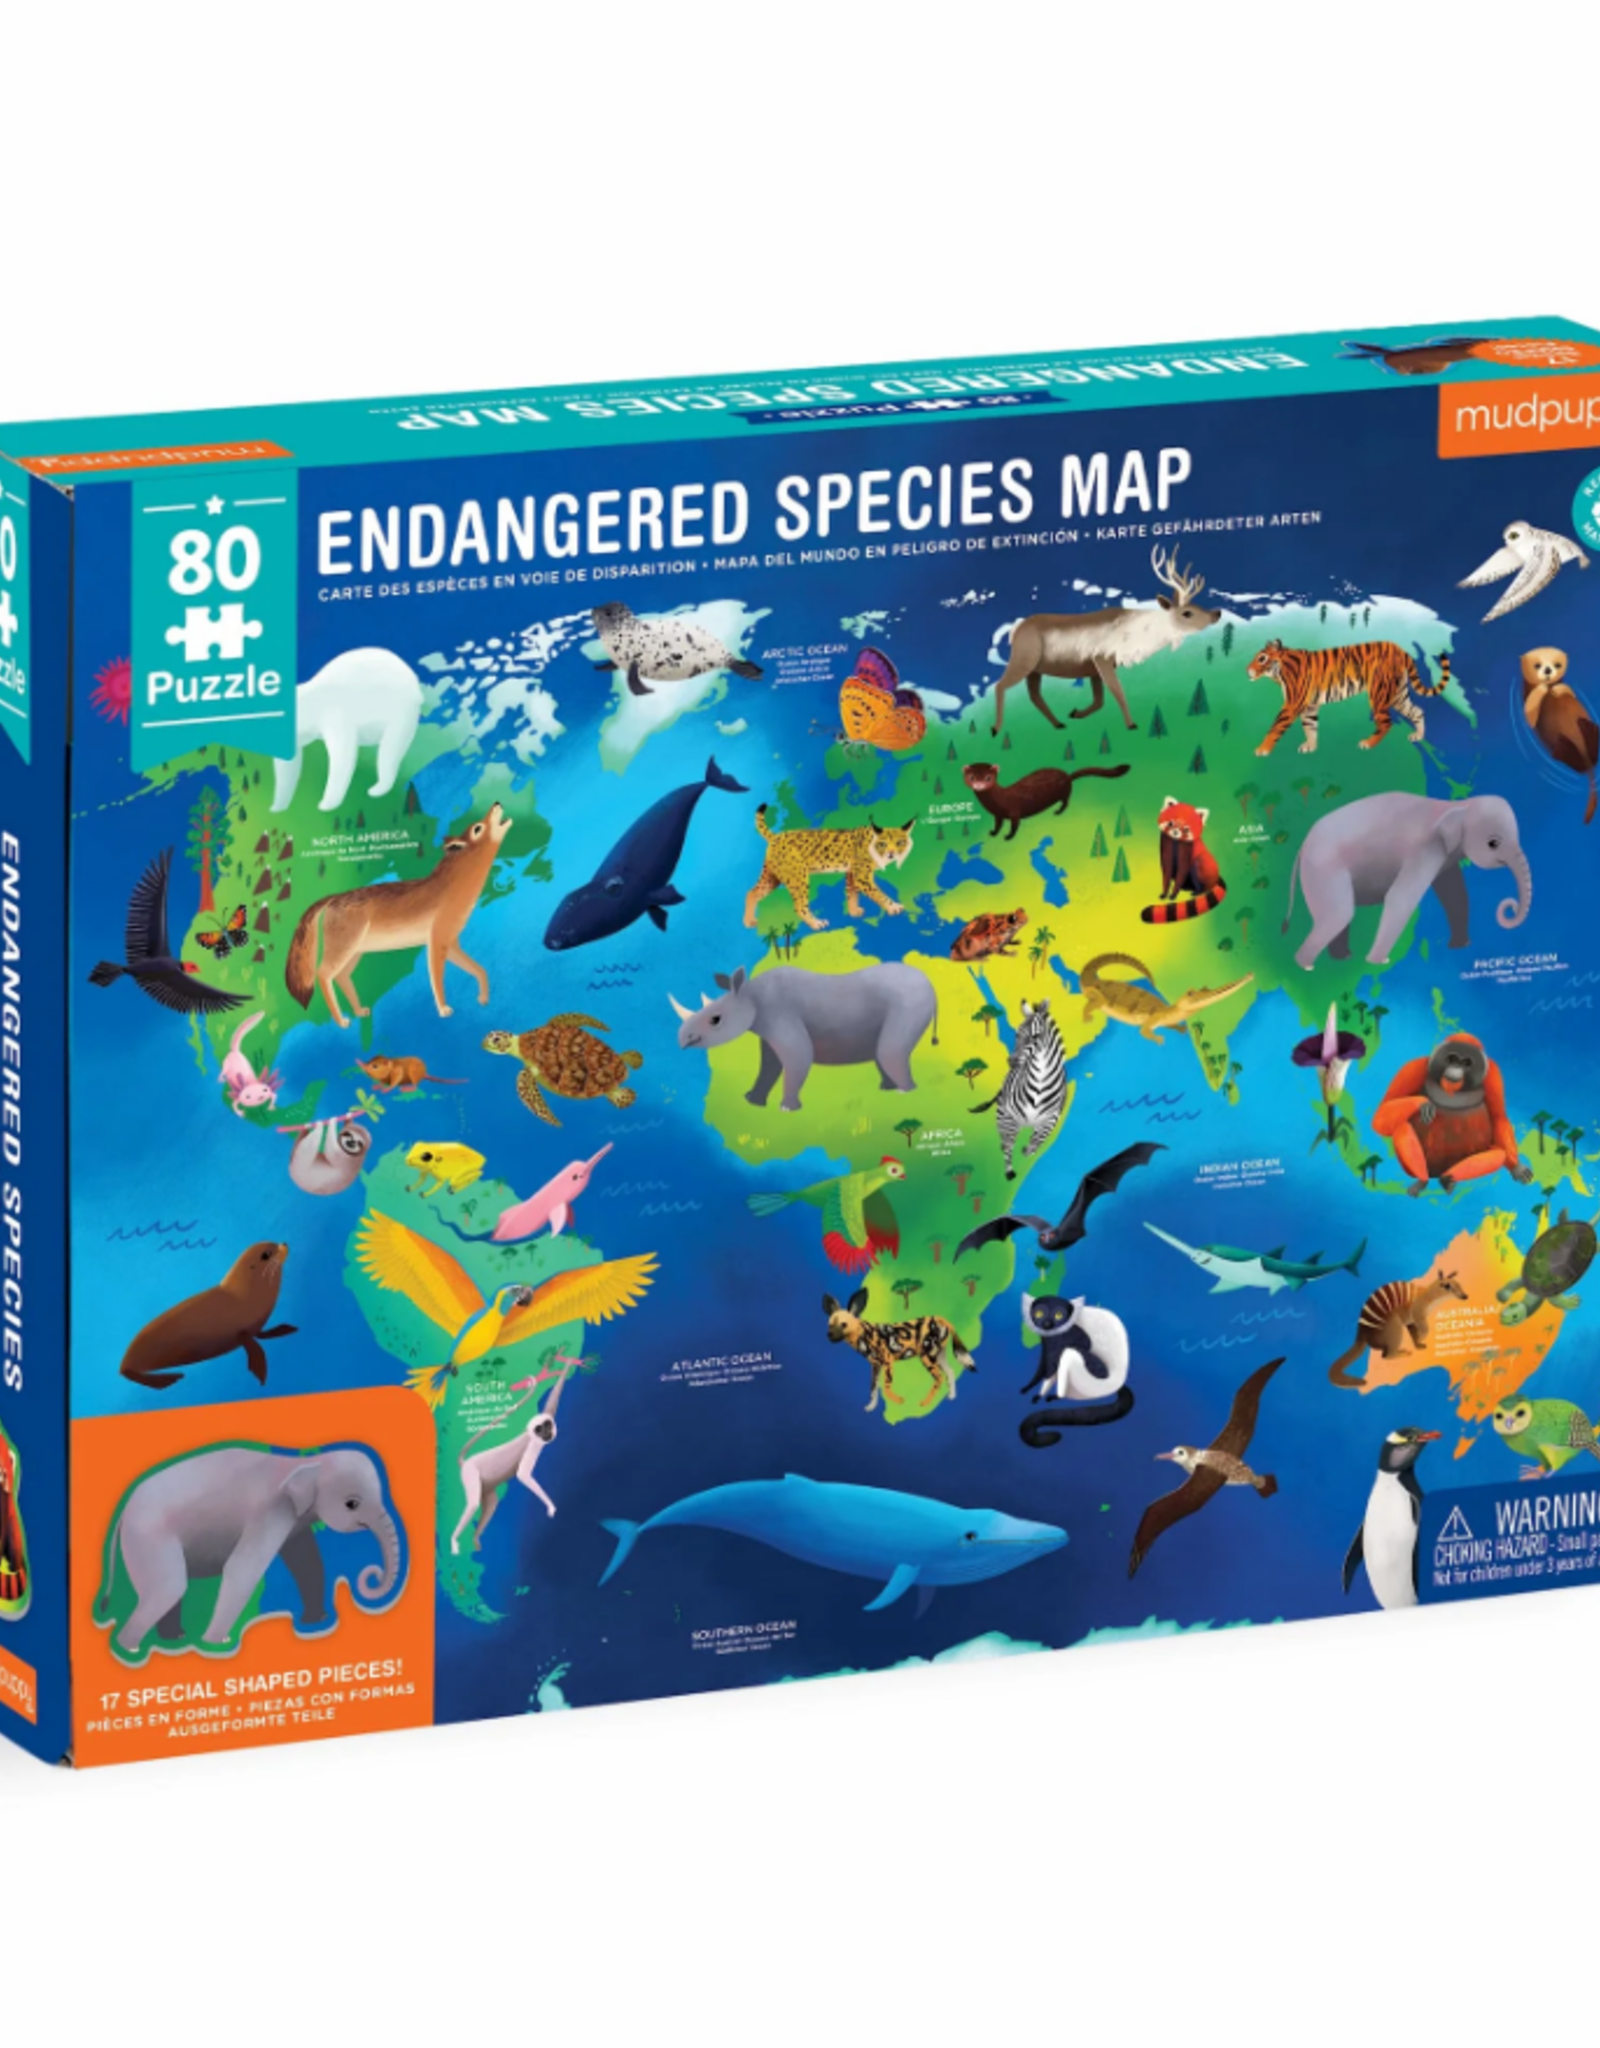 BOOK PUBLISHERS ENDANGERED SPECIES MAP 80 PC